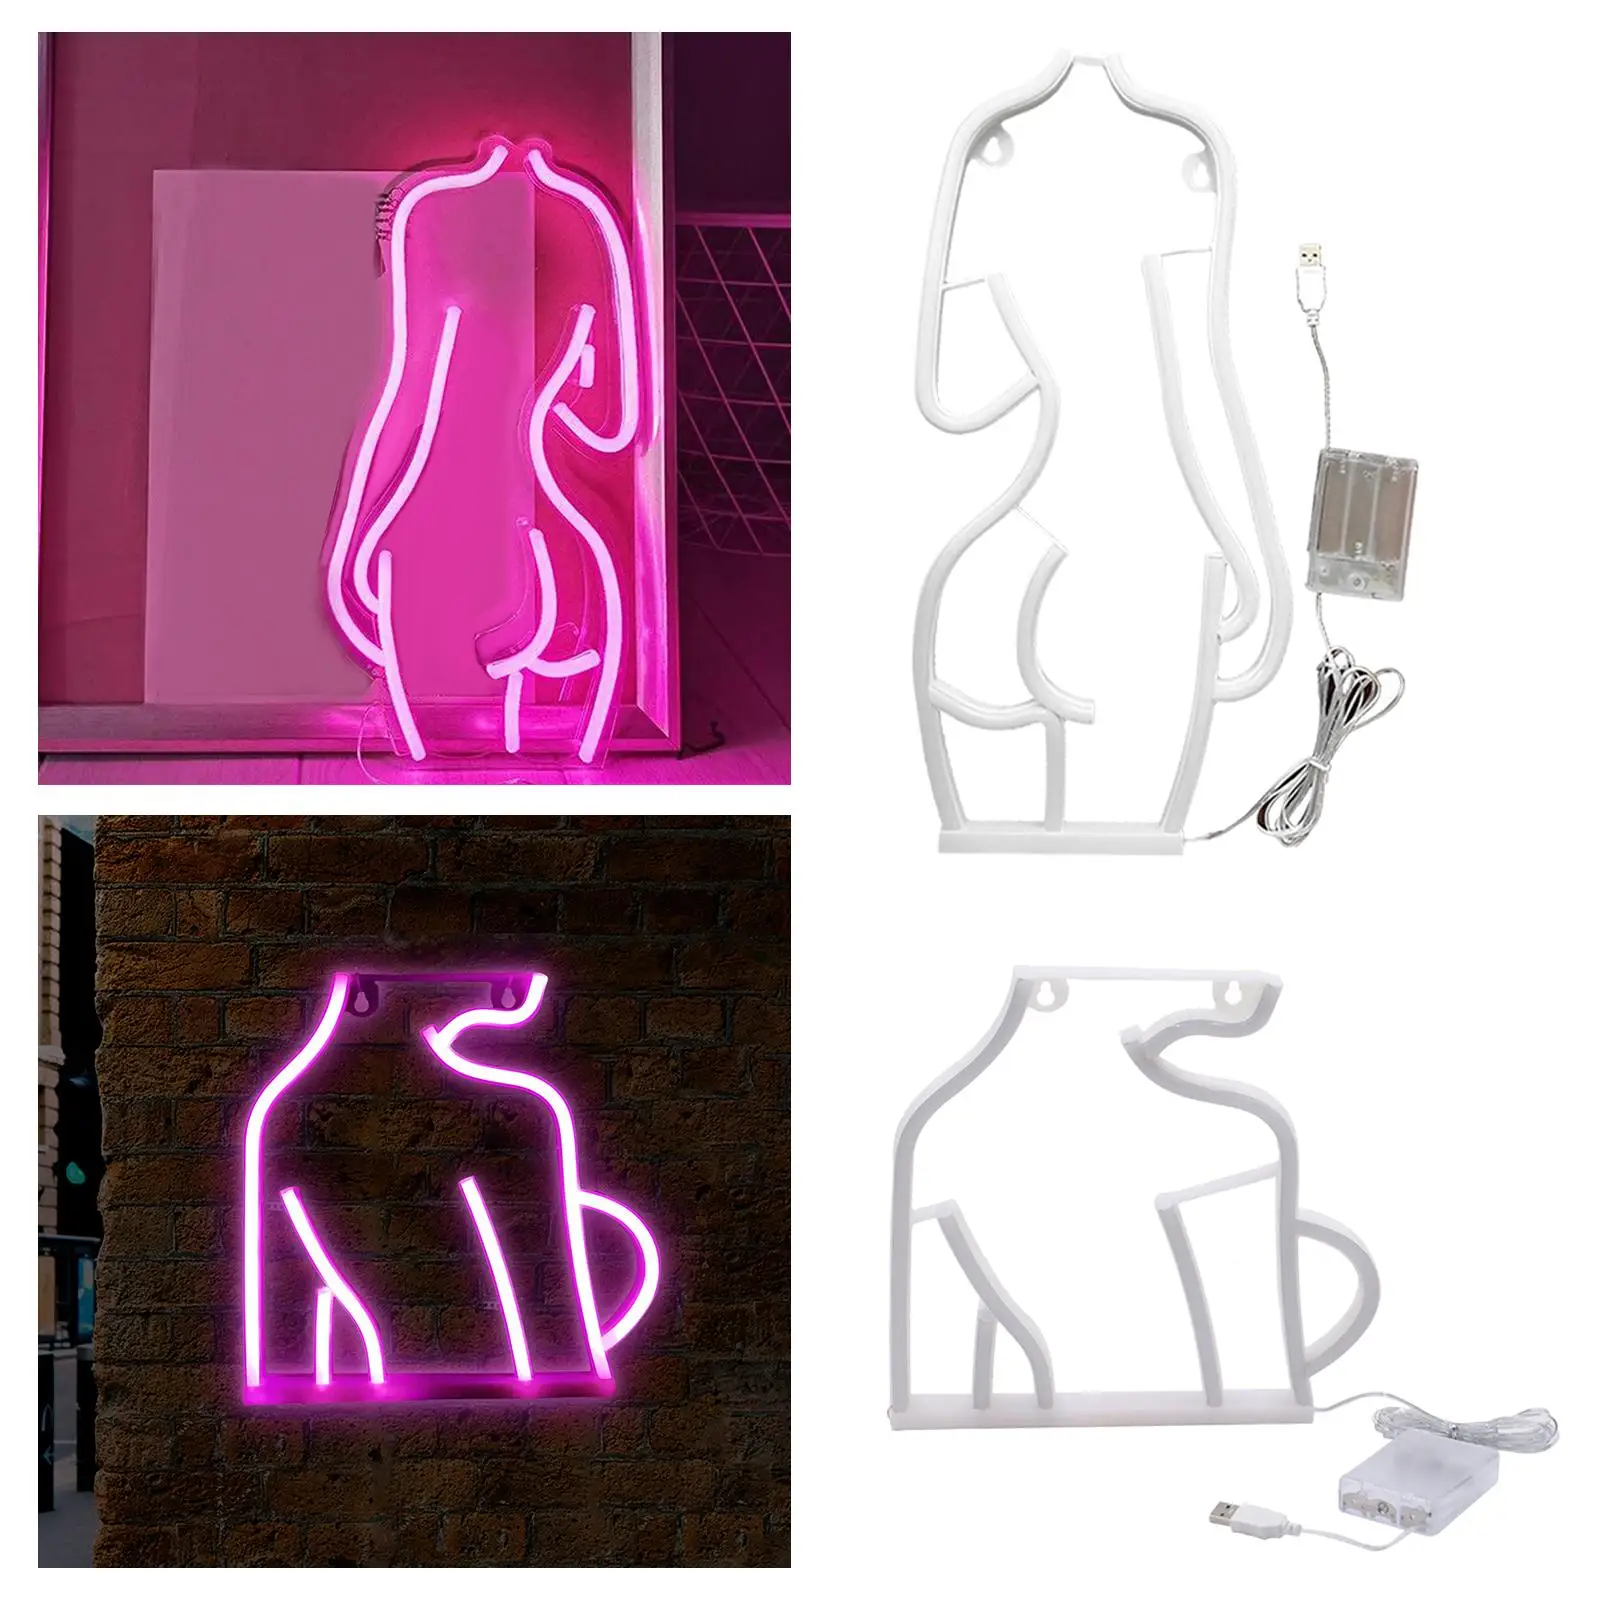 Lady Neon Signs USB Connected Lamp Decorative LED Night Lights Wall Art for Room Dance Studio Party Restaurant Garage